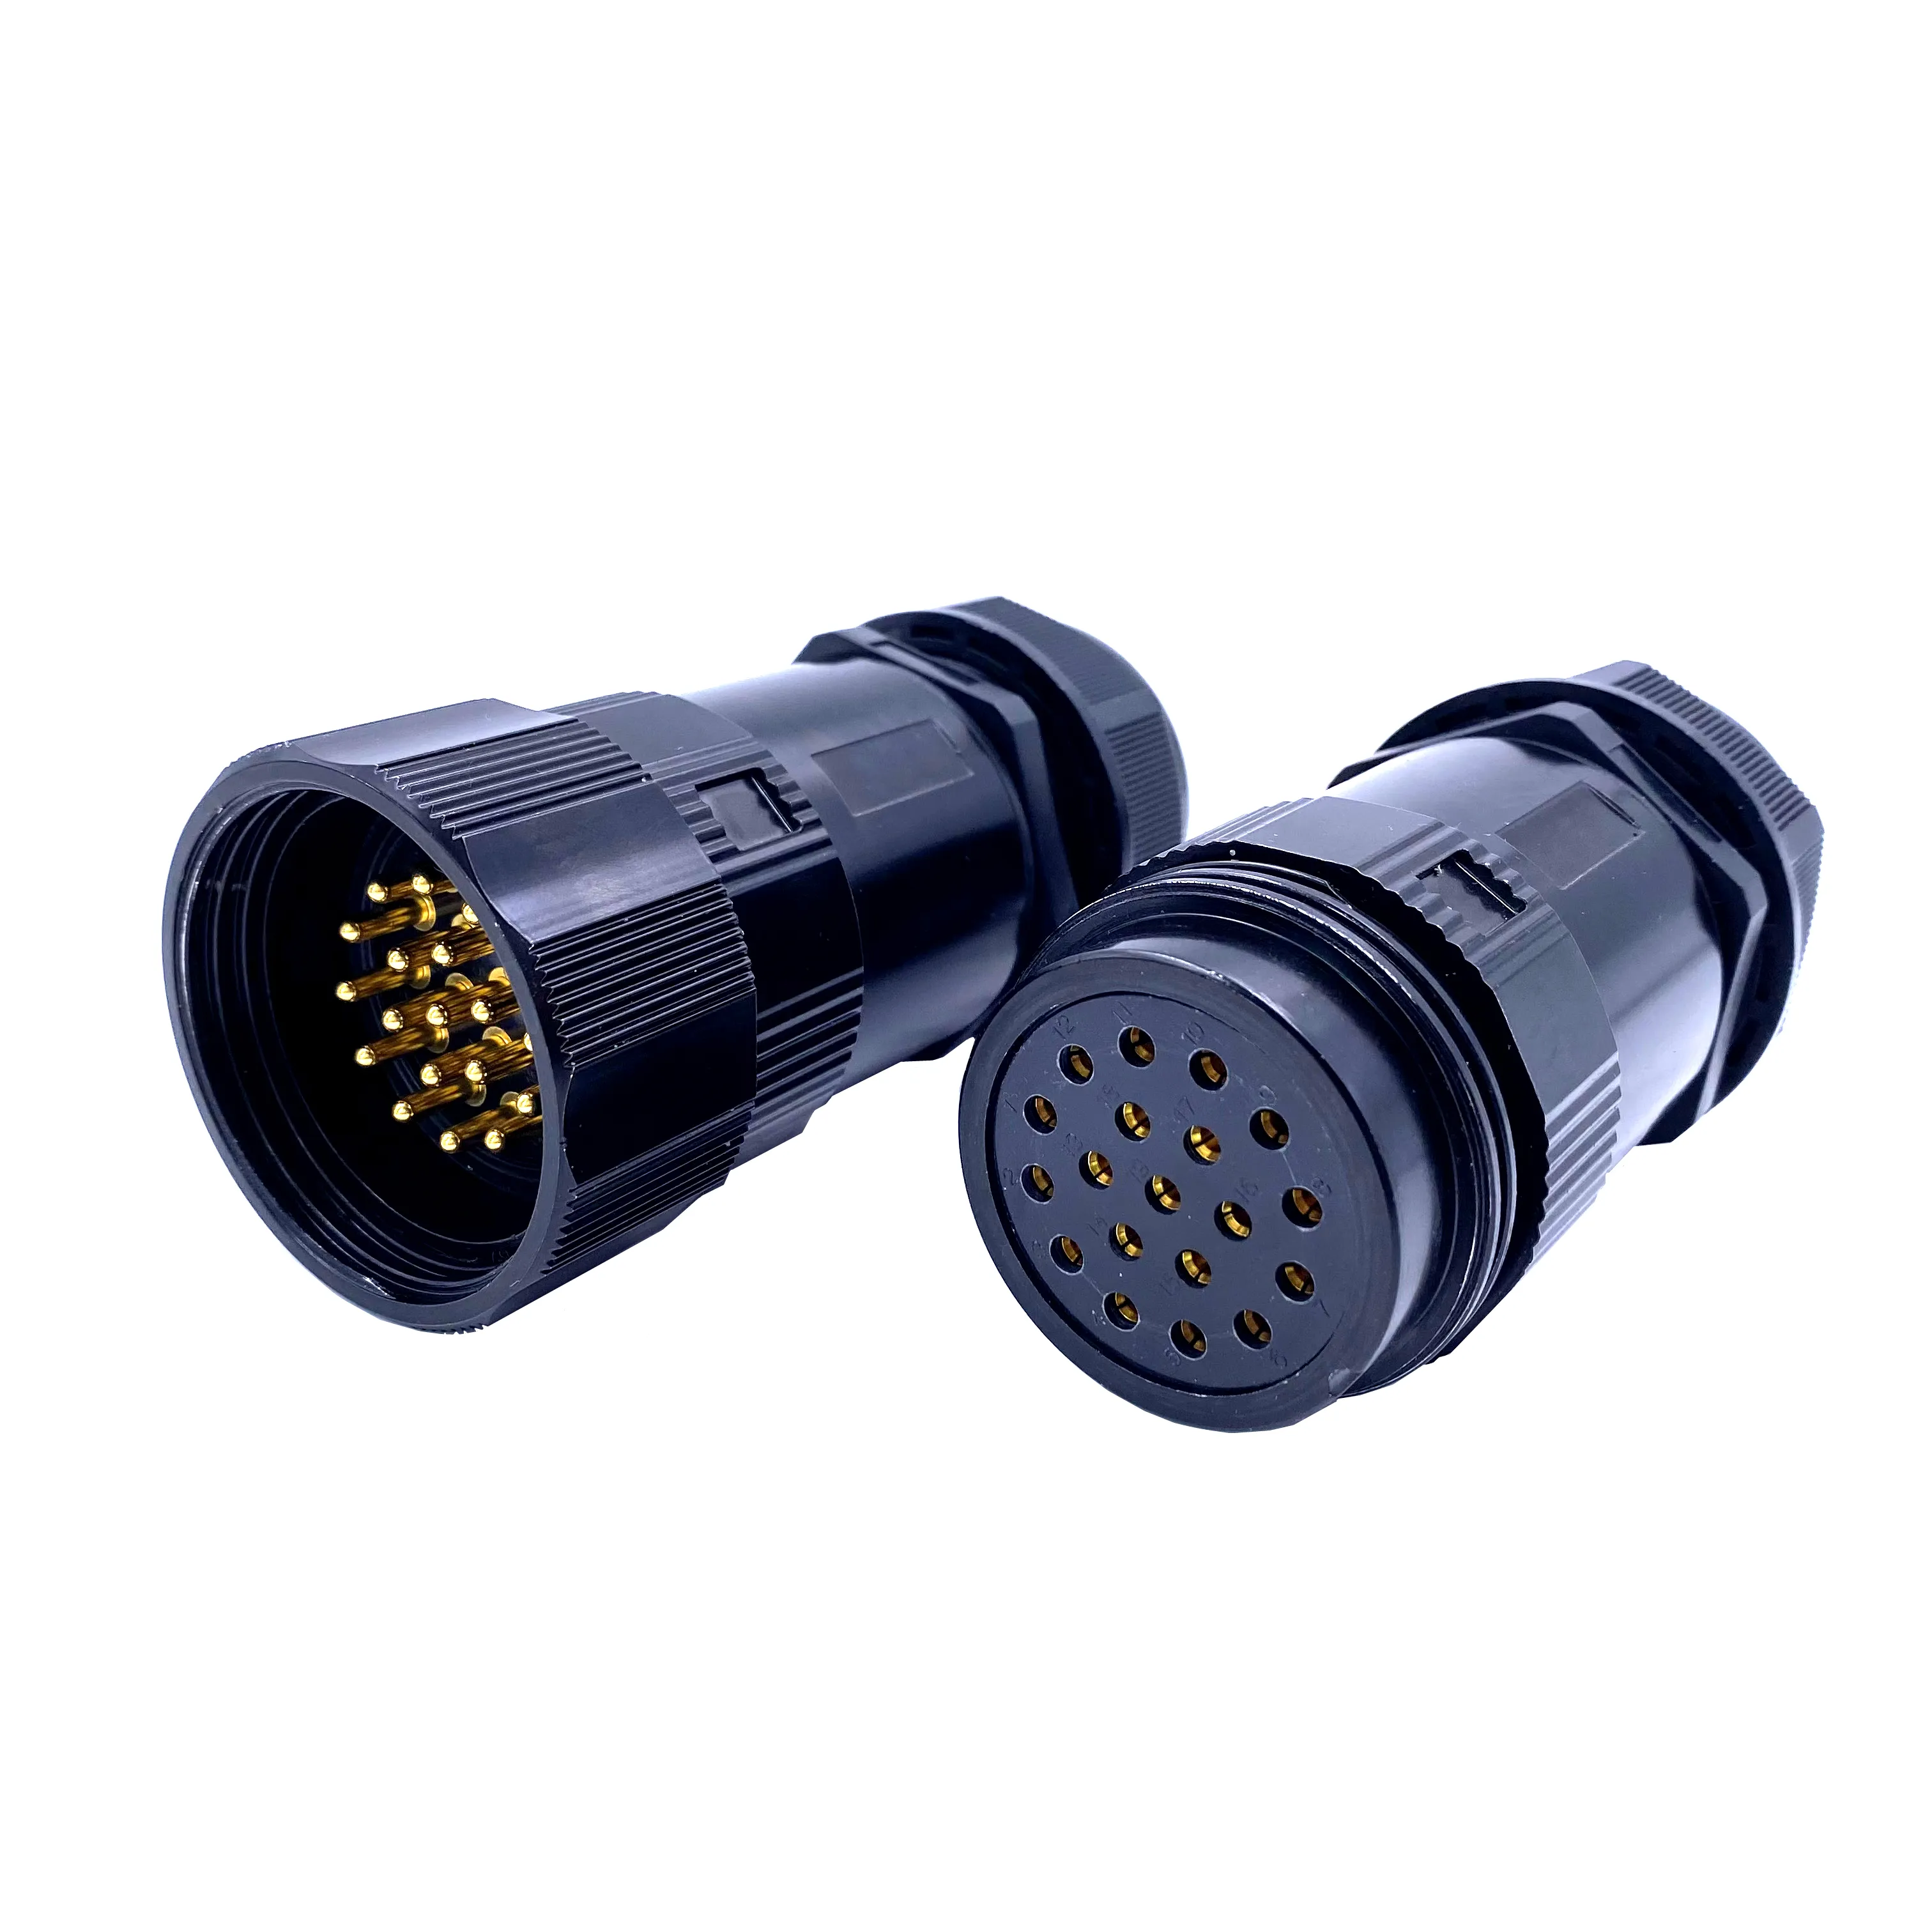 Waterproof Electrical industrial Connector Black 19 Pin Power Socapex Male Plug Female Socket Inline Power Connector